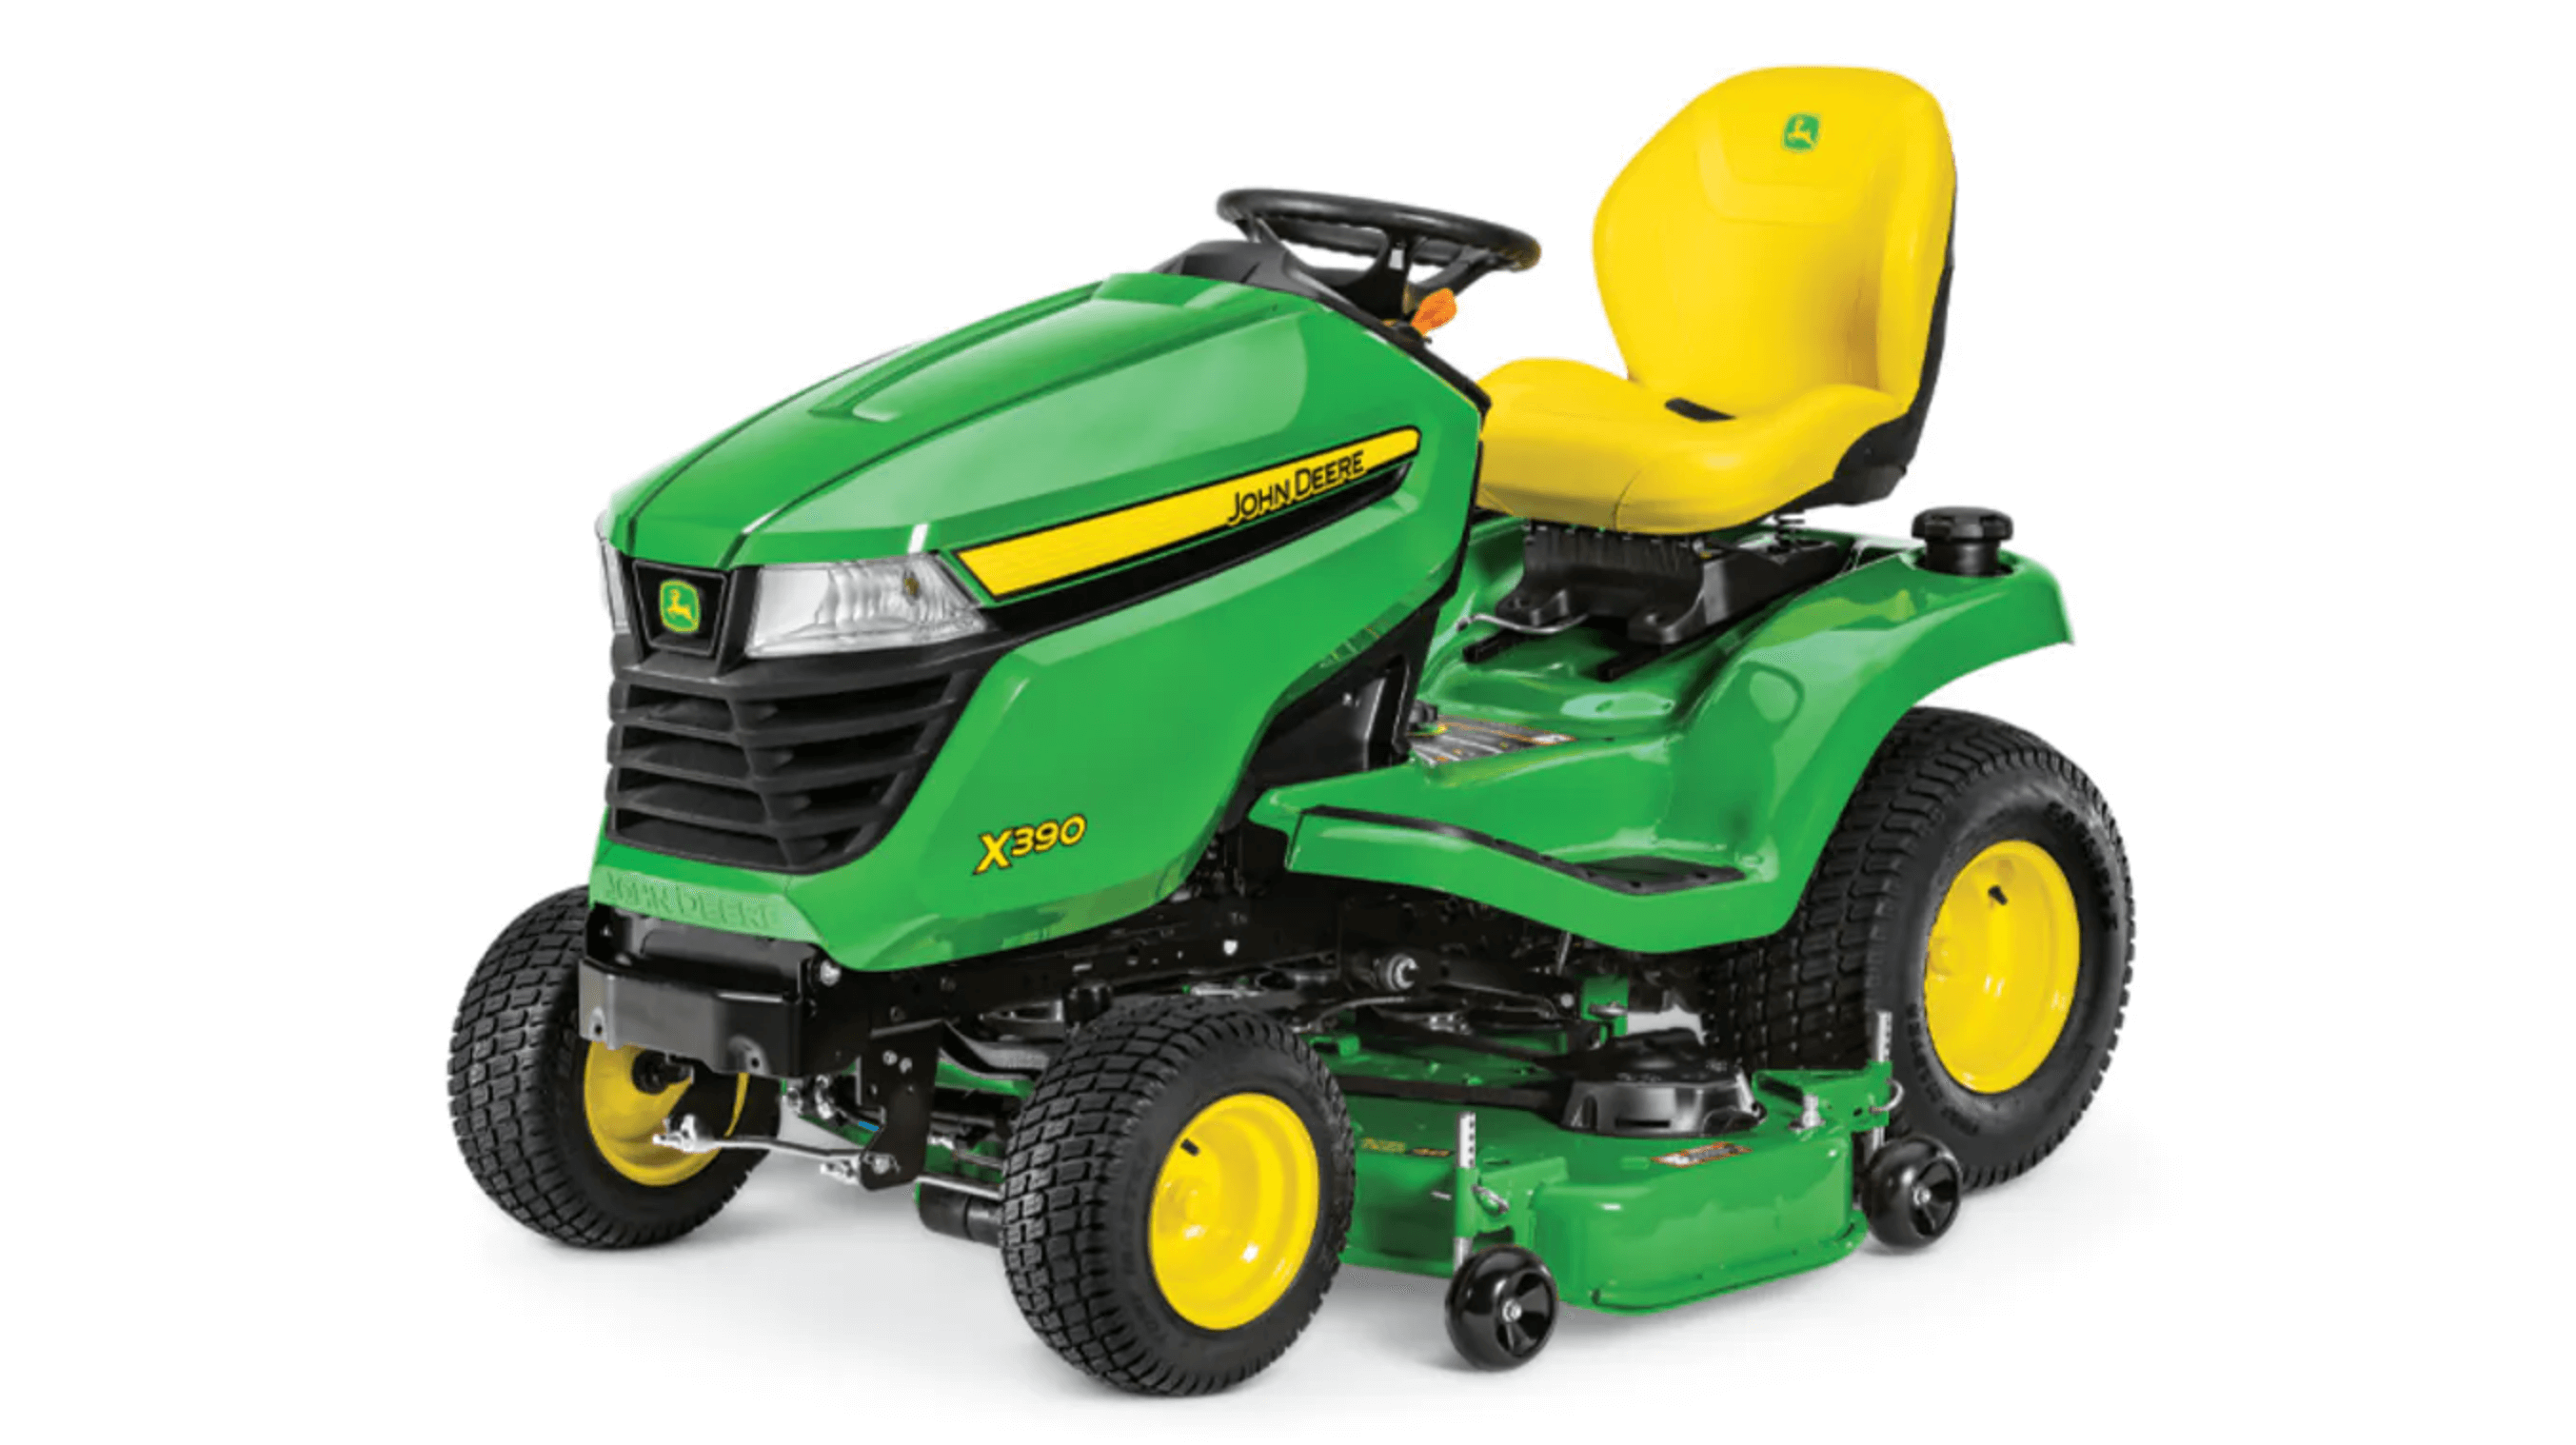 x390-lawn-tractor-48-in